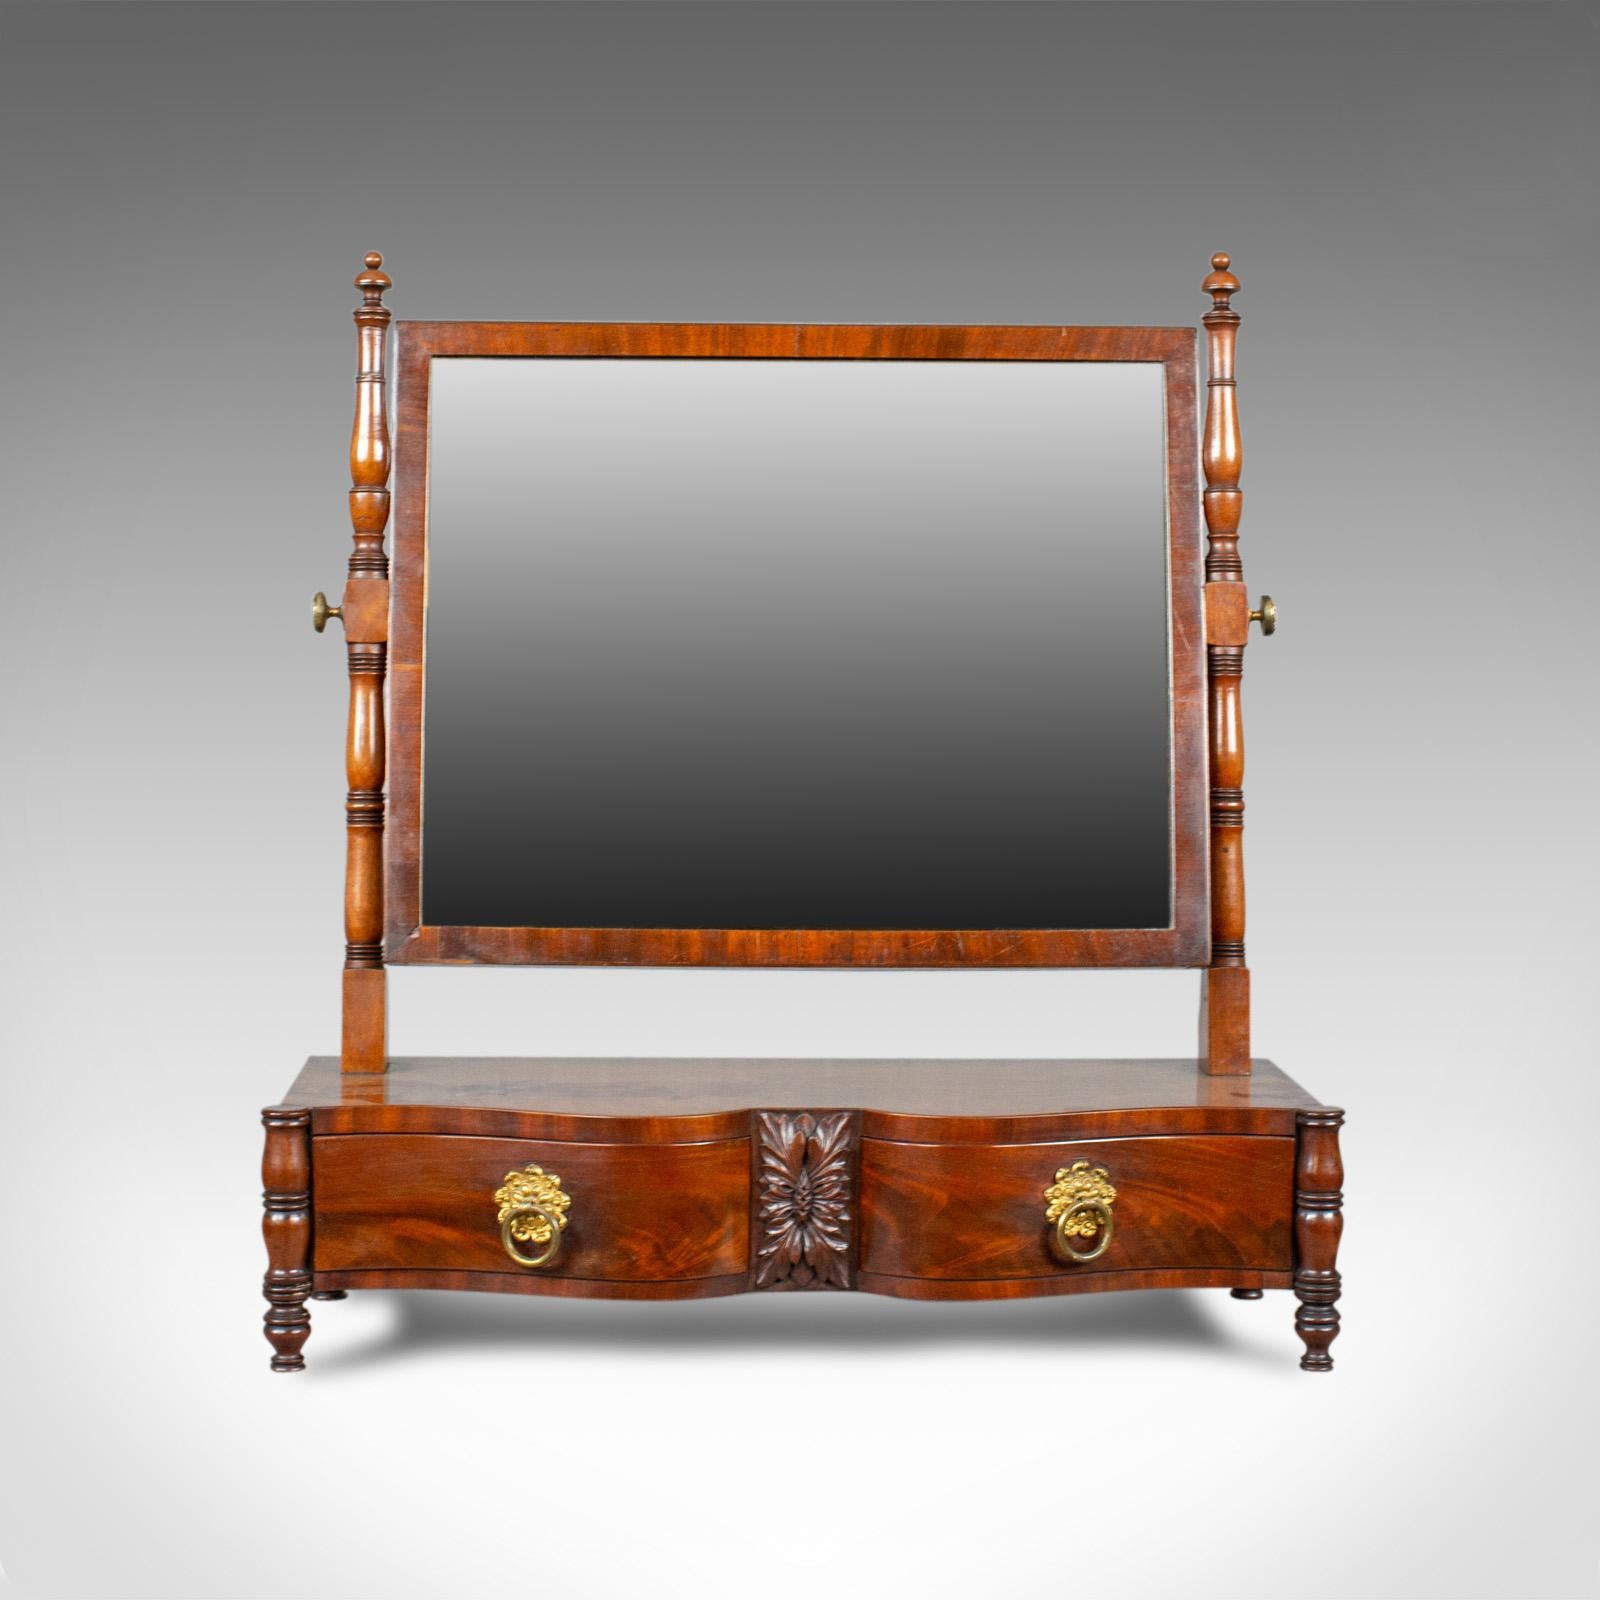 This is an antique dressing table mirror in flame mahogany. An English, Victorian, vanity, platform, toilet mirror dating to circa 1890.

A mid-sized, adjustable mirror in fine order throughout
Flame mahogany displaying grain interest and a